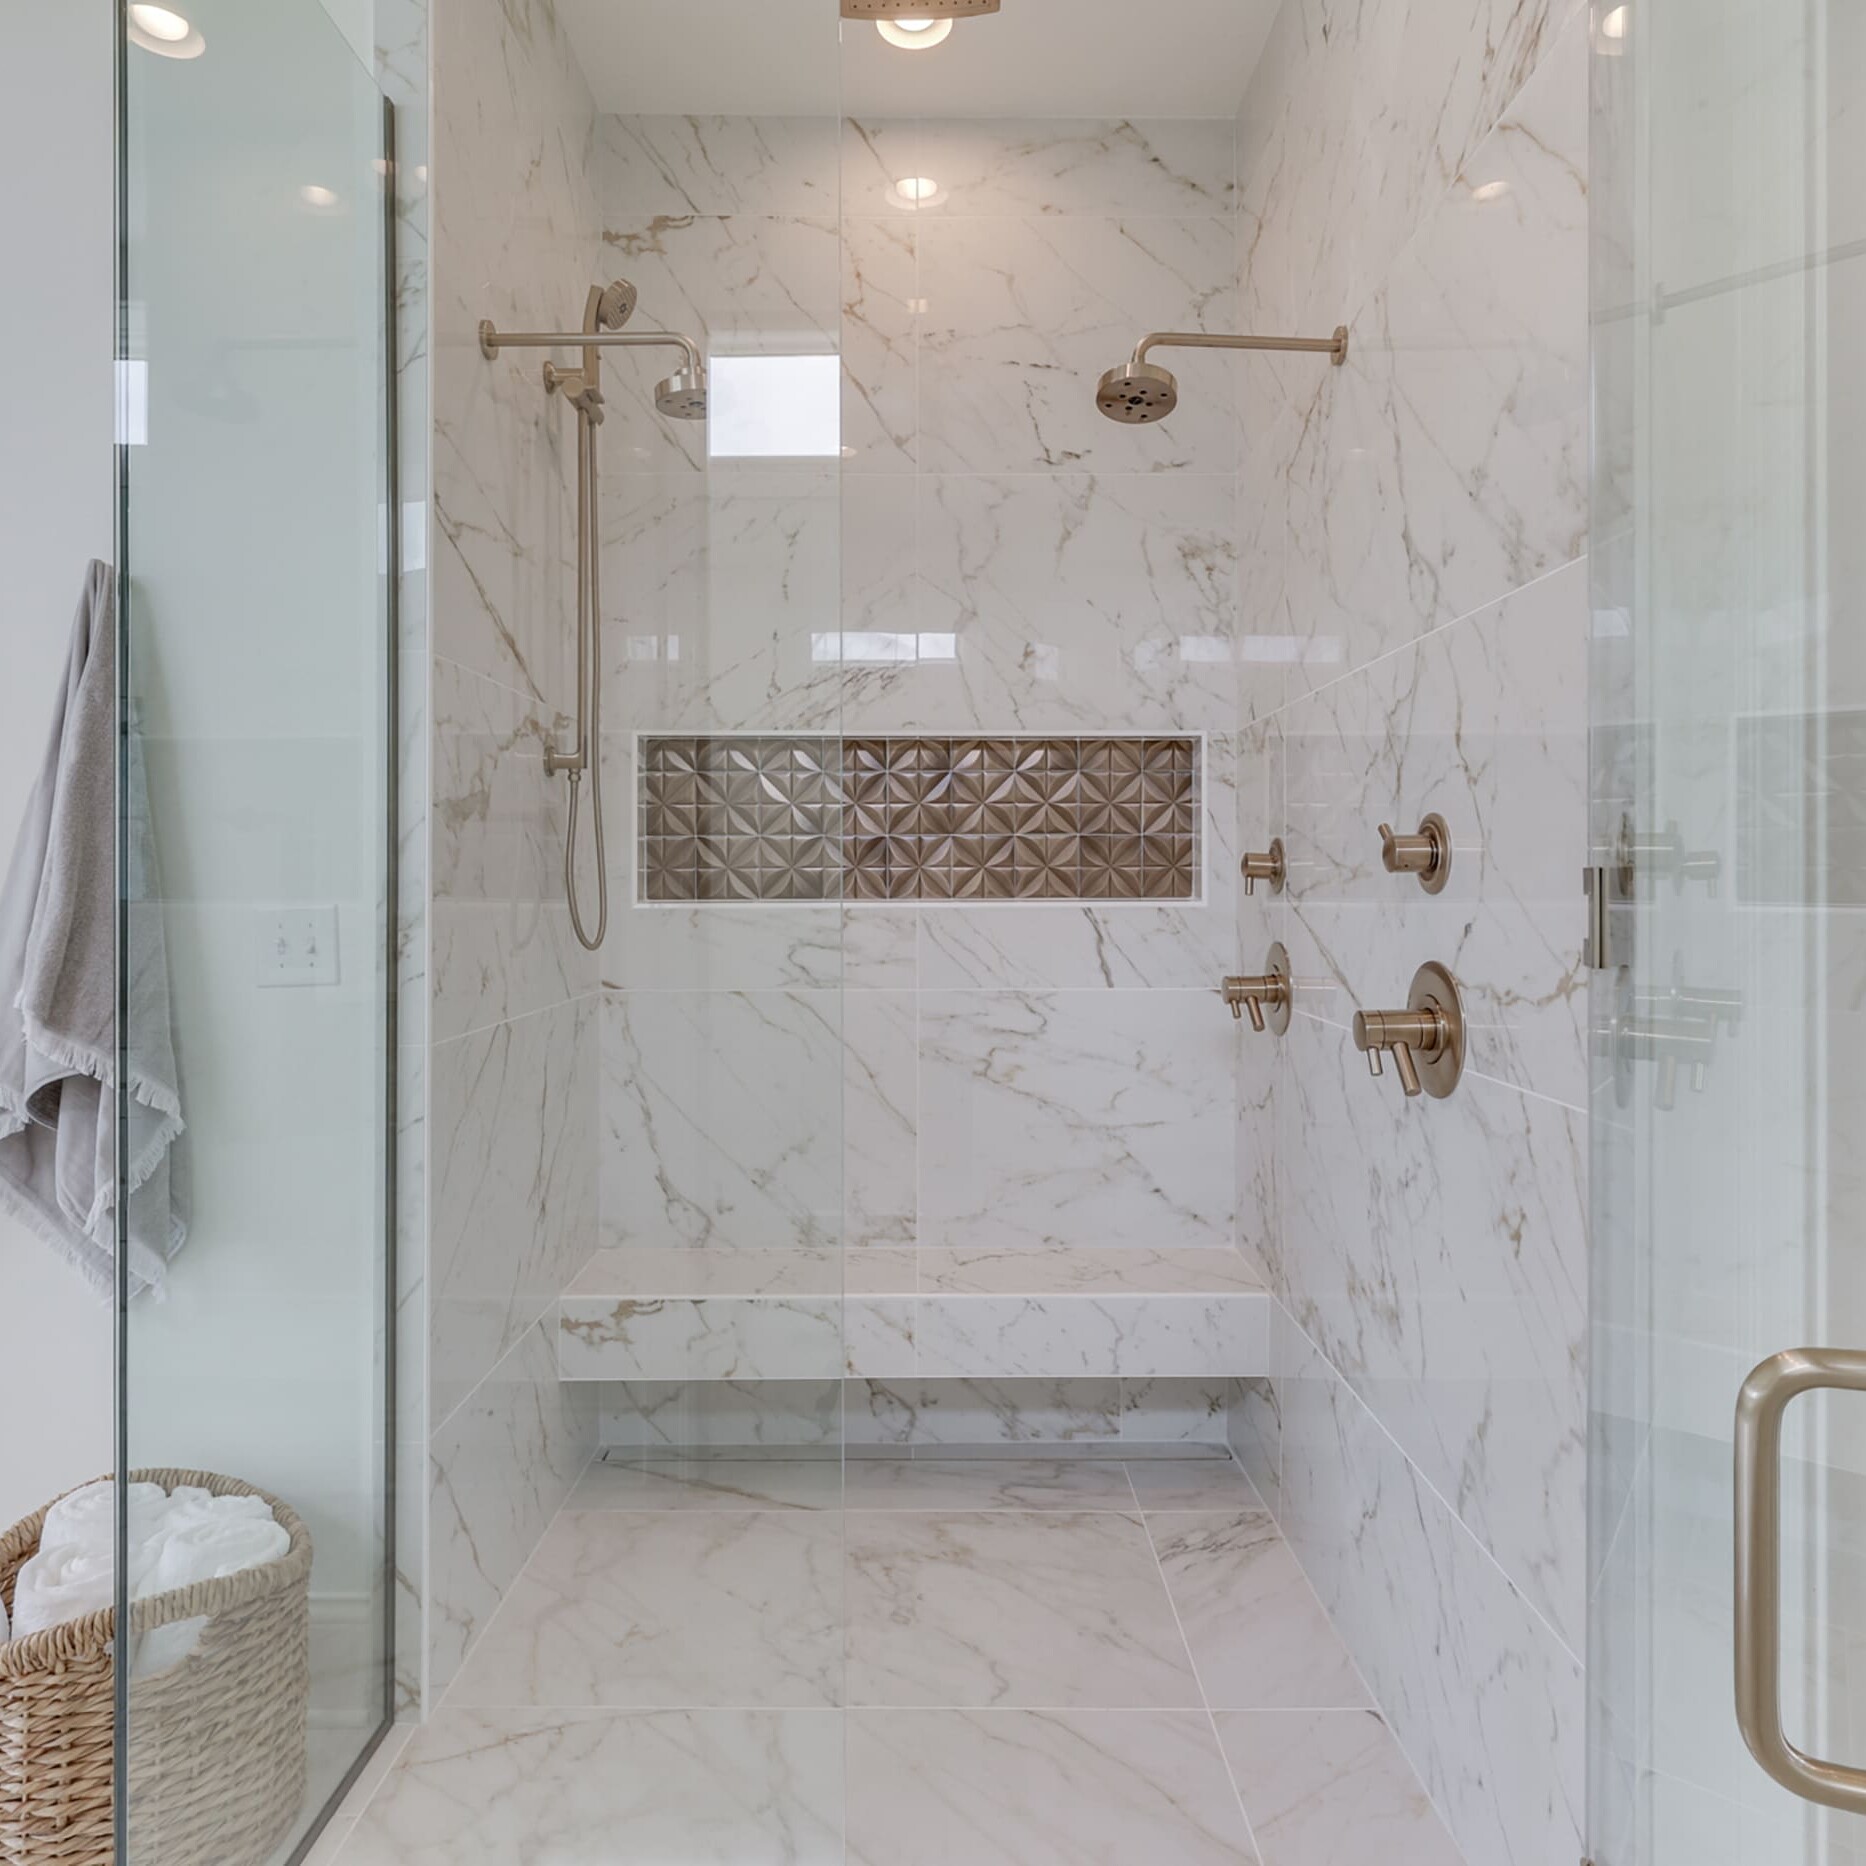 A bathroom with a glass shower stall and a bench.